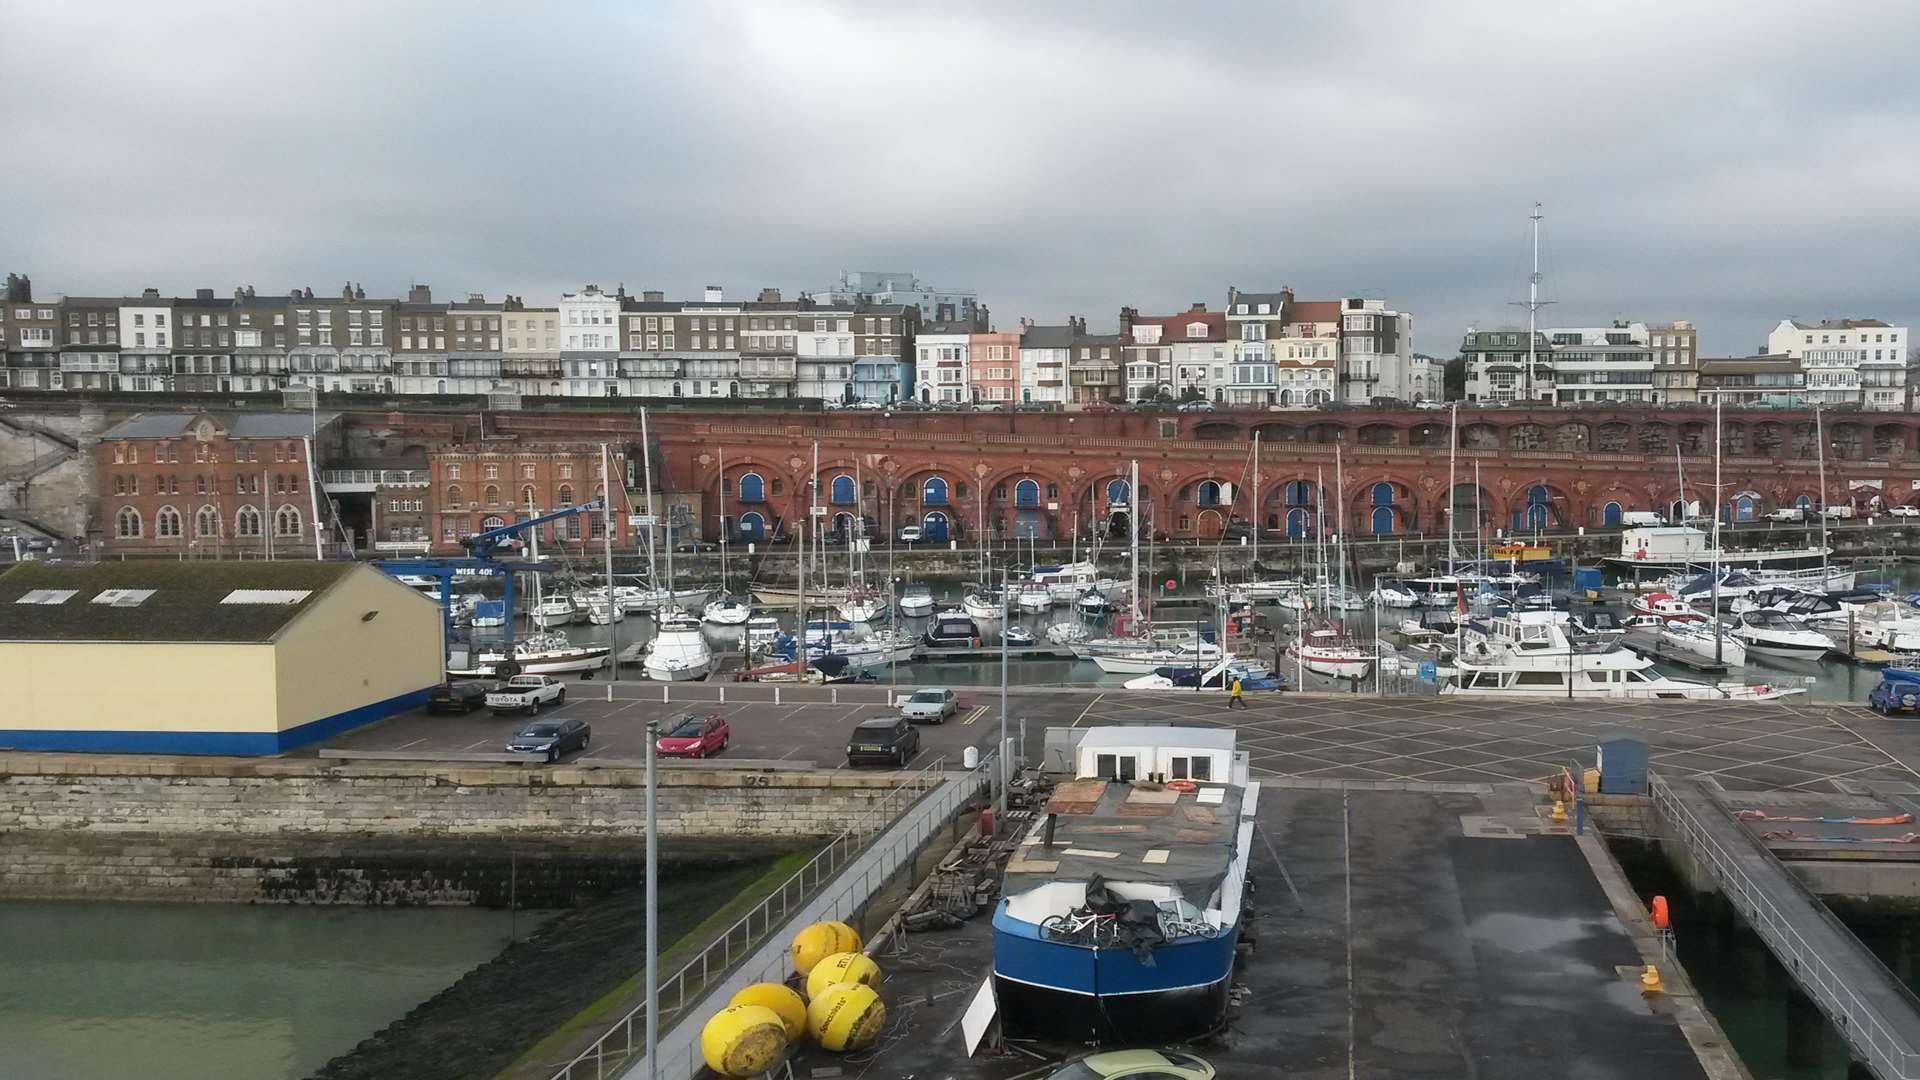 The incident took place at Ramsgate Harbour